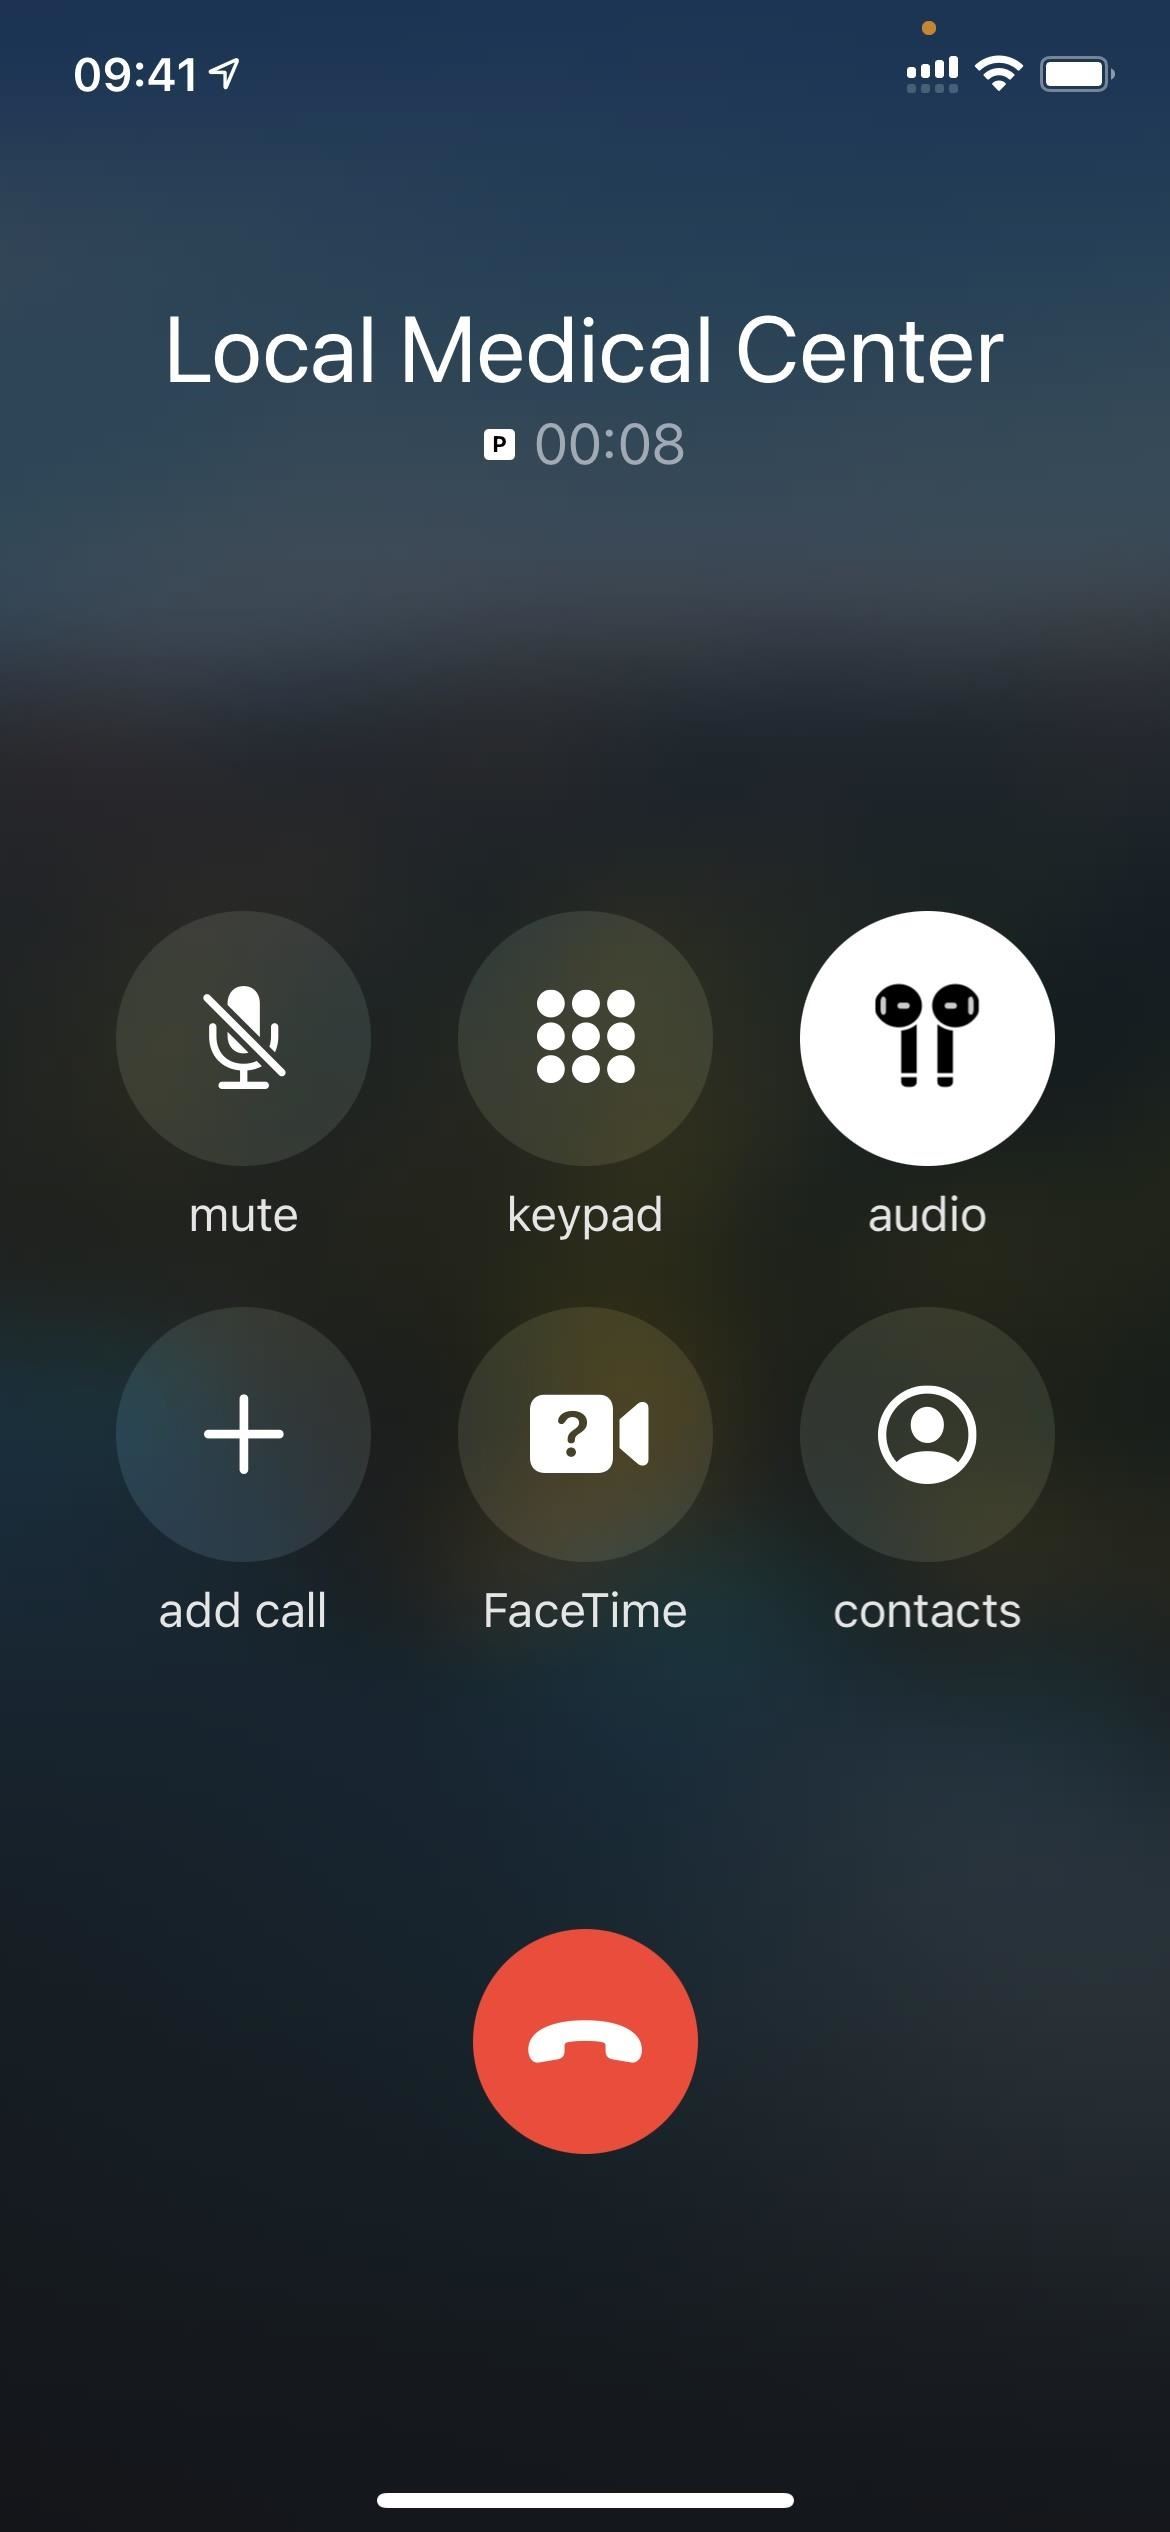 The Secret iPhone Dialer Trick That Dials Extensions Automatically & Navigates Automated Call Menus for You